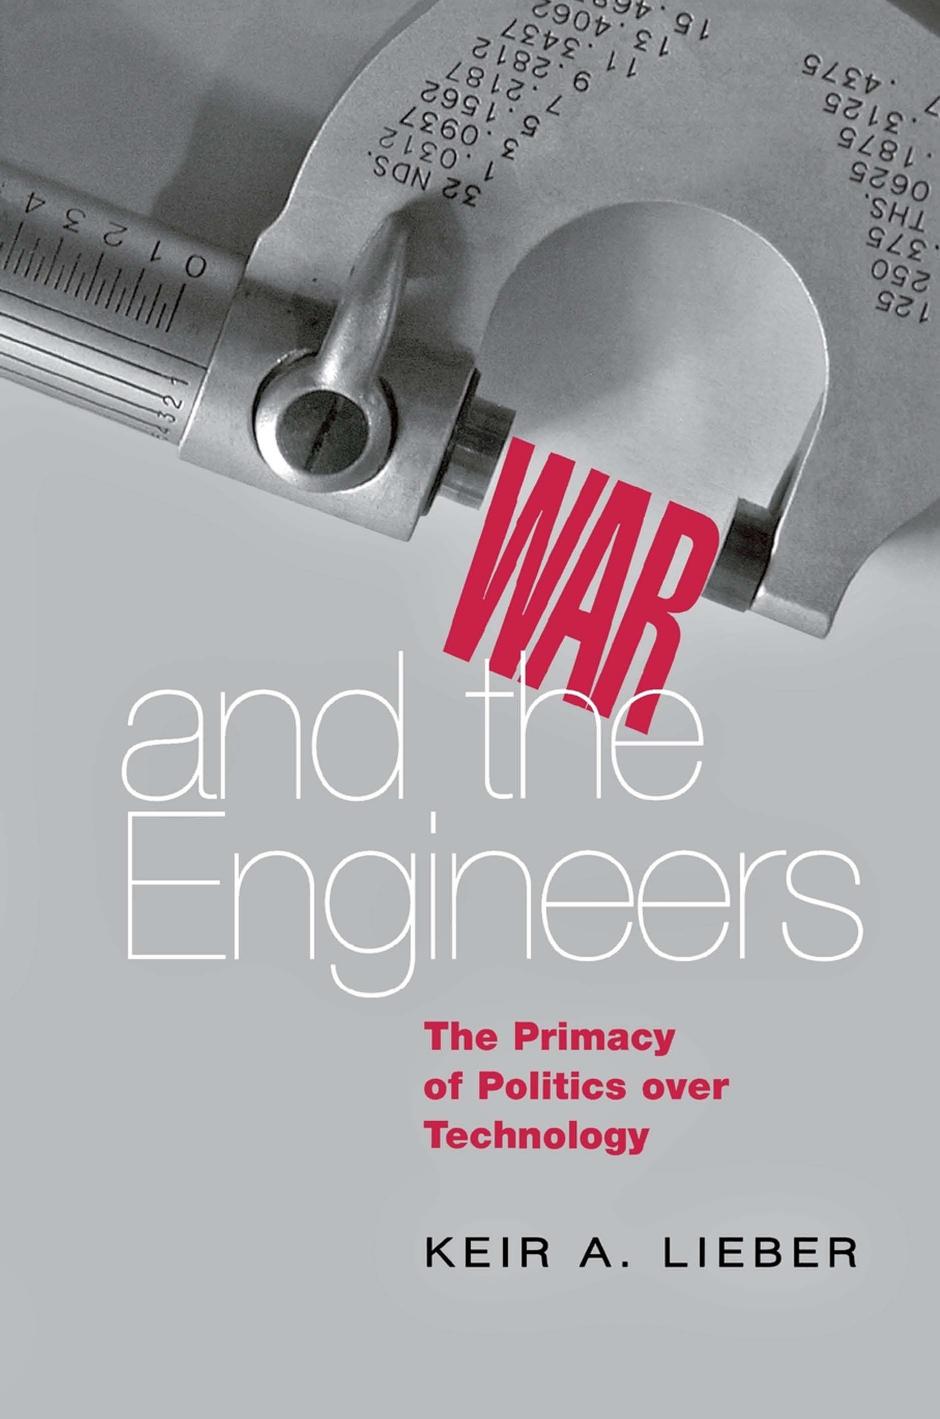 War and the Engineers: The Primacy of Politics over Technology by Keir A. Lieber